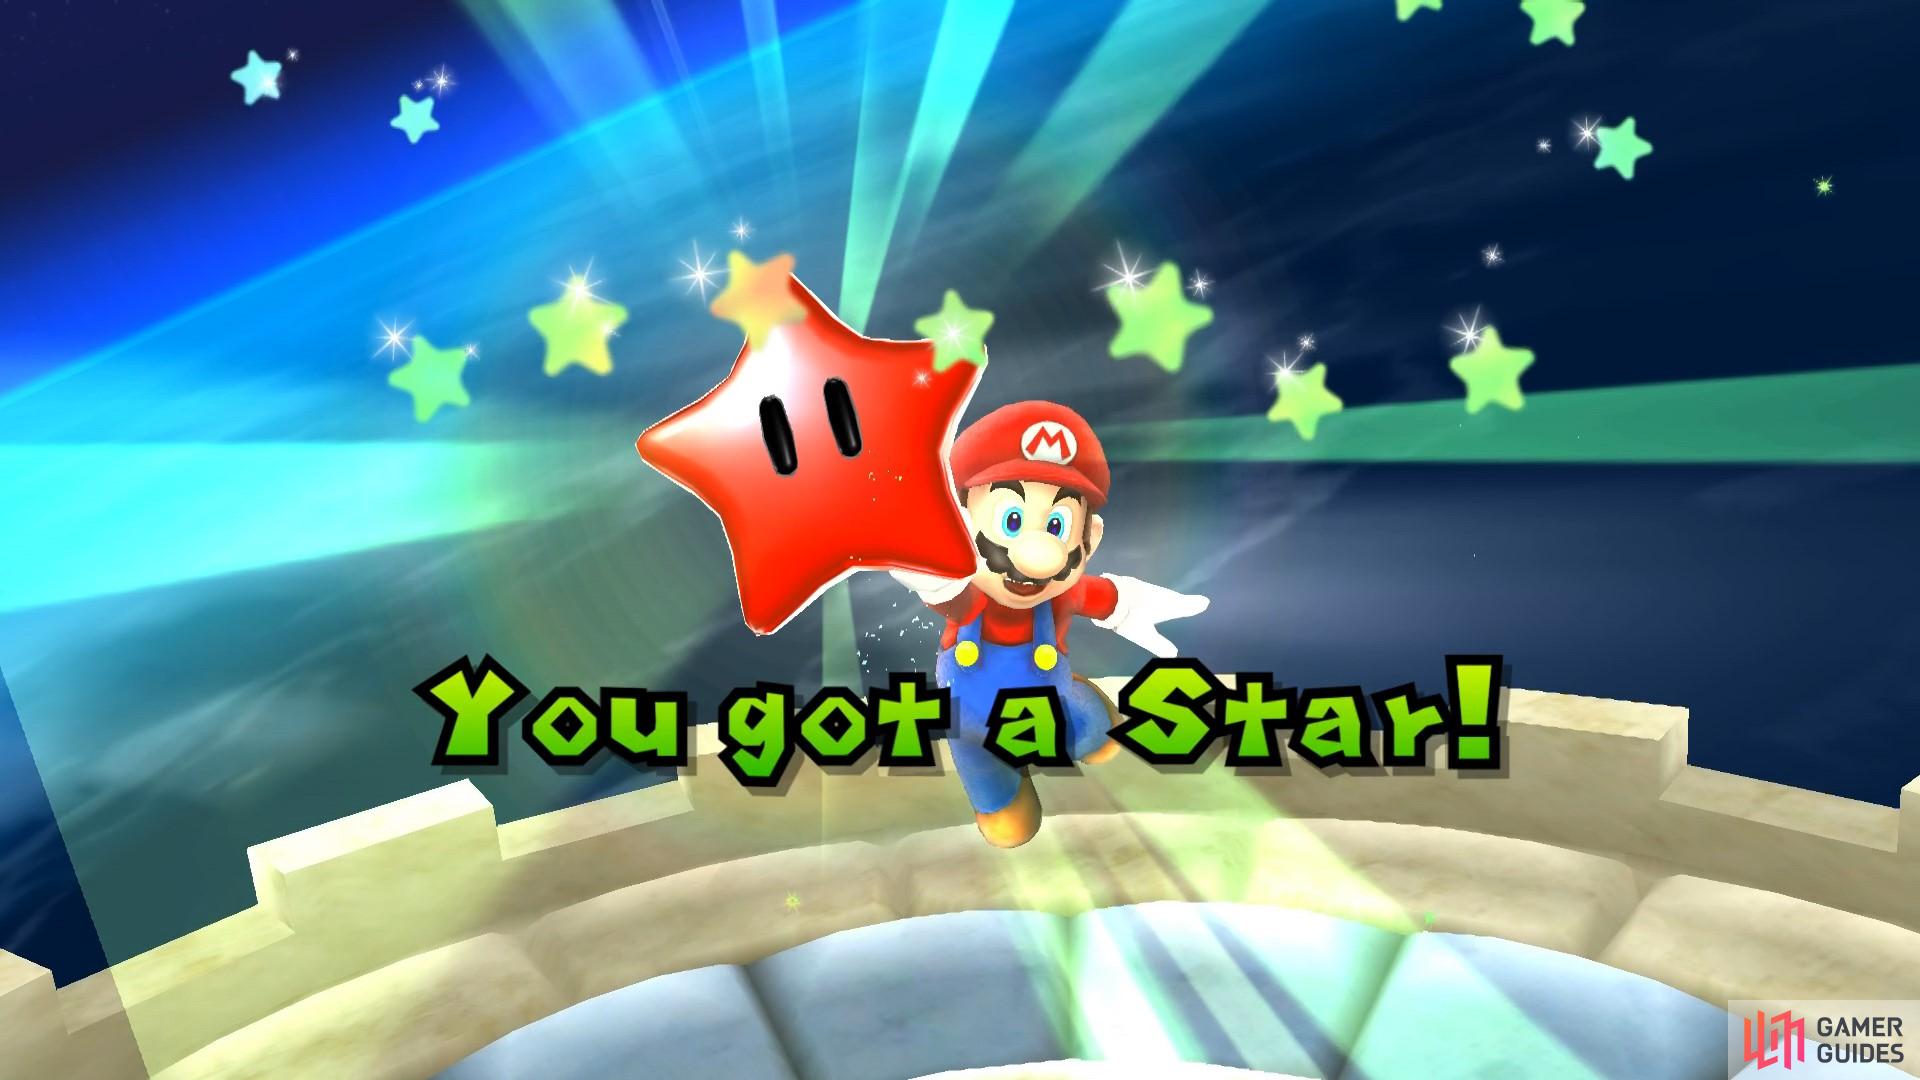 Once you've collected all 100 coins, you'll earn a Red Power Star!